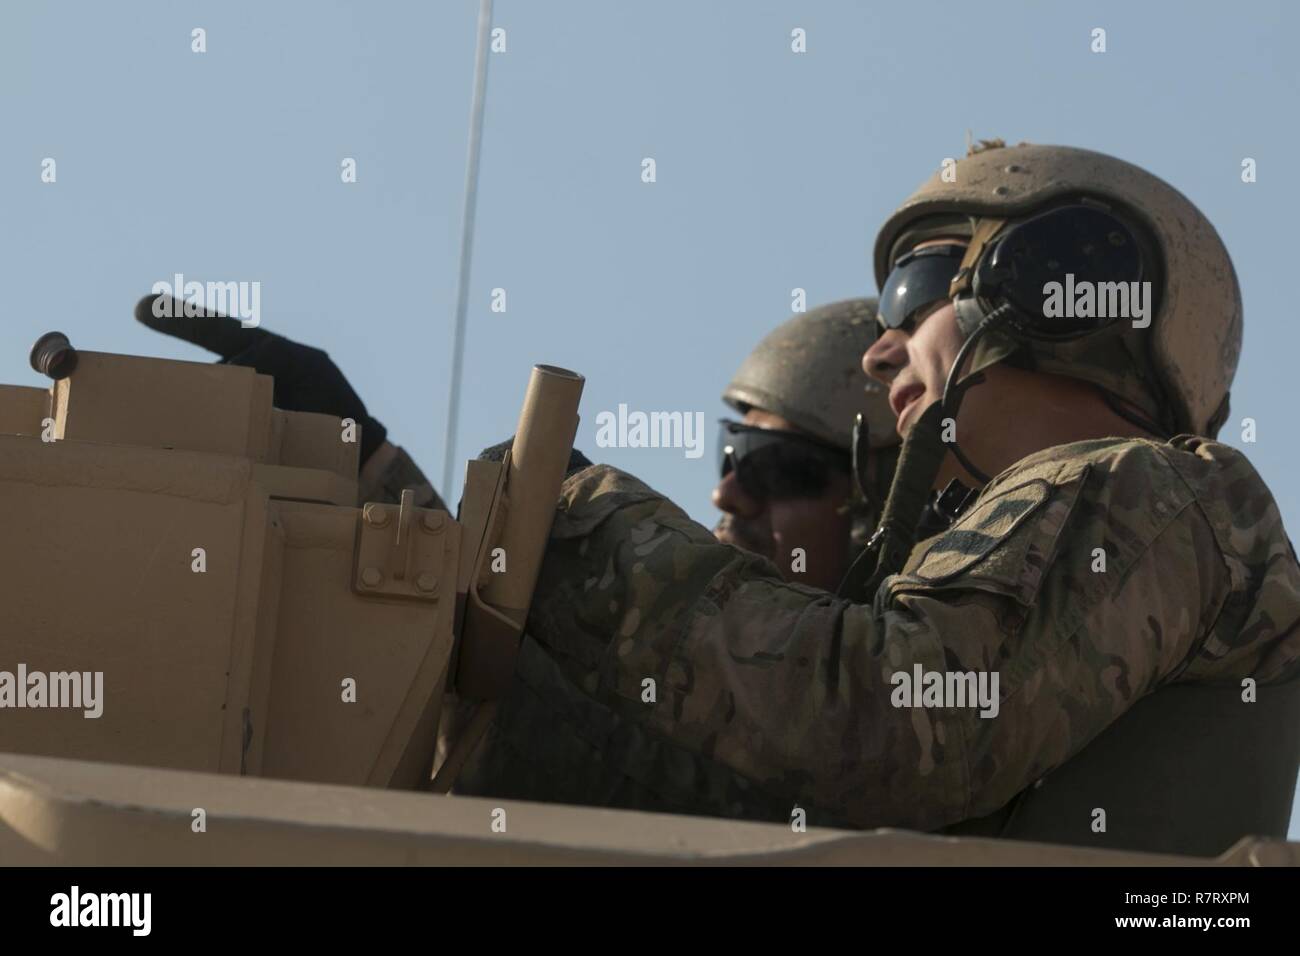 An M2A3 Bradley Fighting Vehicle crew from the 3rd Armored Brigade Combat Team, 1st Cavalry Division discusses targeting in preparation for their turn to execute Table VI qualification at the Udairi Range Complex March 27. The brigade tank and Bradley crews spent about two weeks in the field conducting sustainment gunnery to ensure all the crews qualified at day and night fire to maintain proficiency. Stock Photo